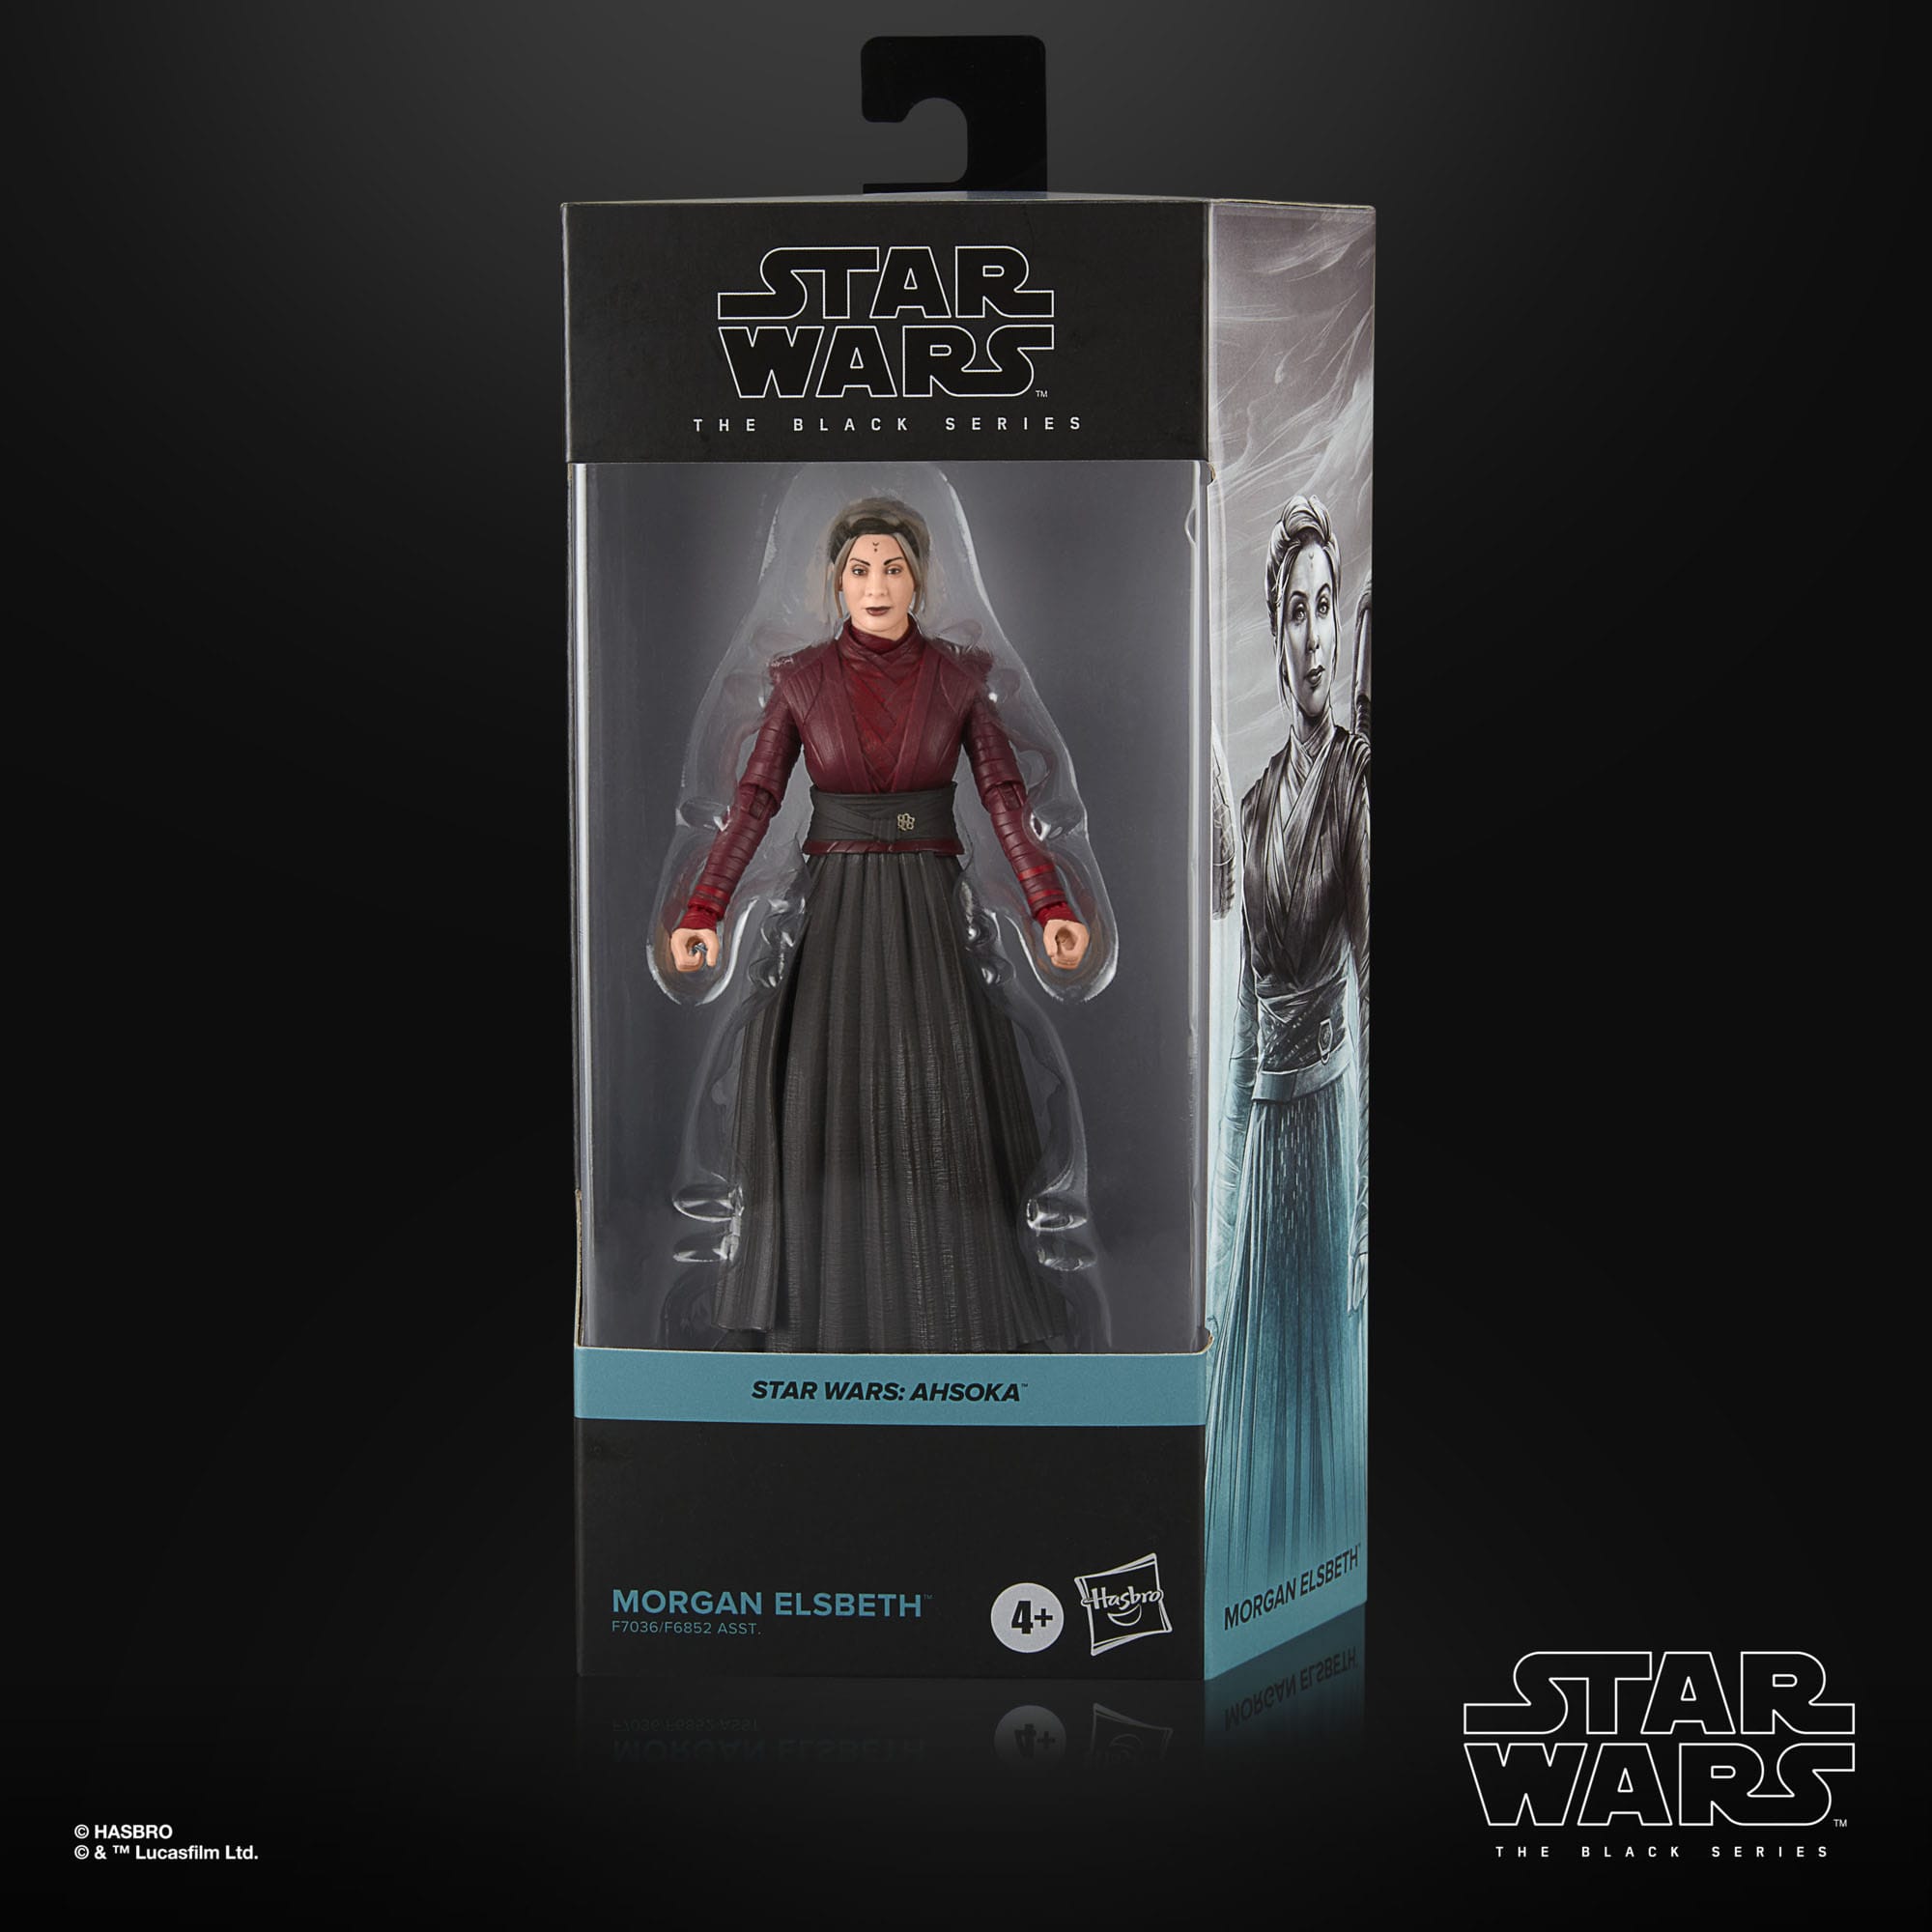 Star Wars The Black Series 2 6-Inch Action Figures Wave 1 Case of 6 HSF6852A 